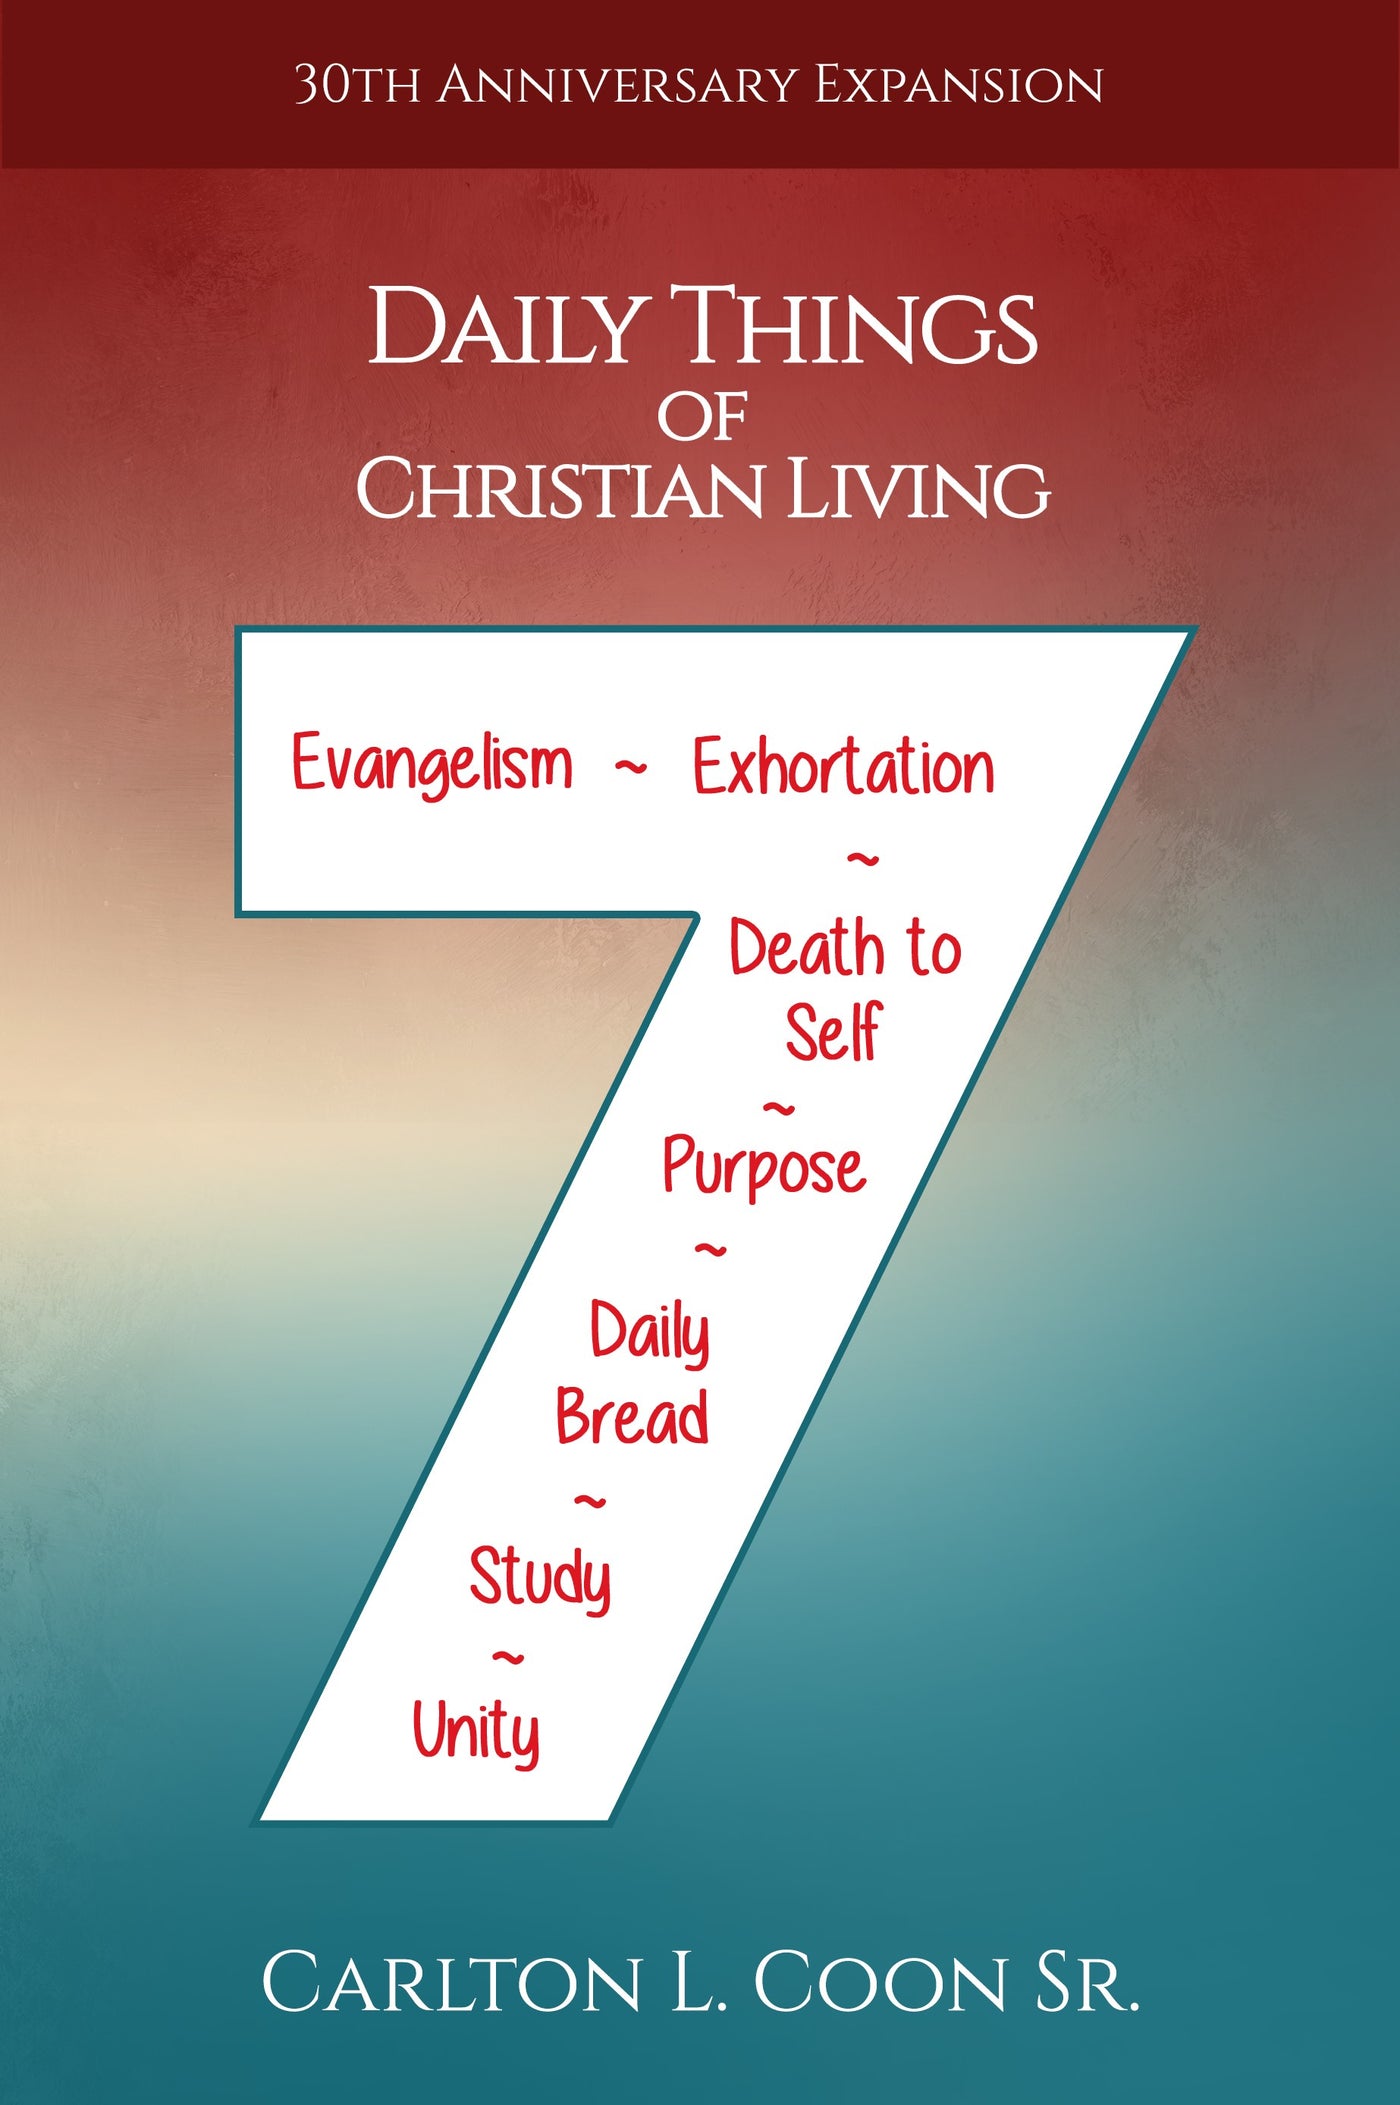 Daily Things of Christian Living - Daily Purpose